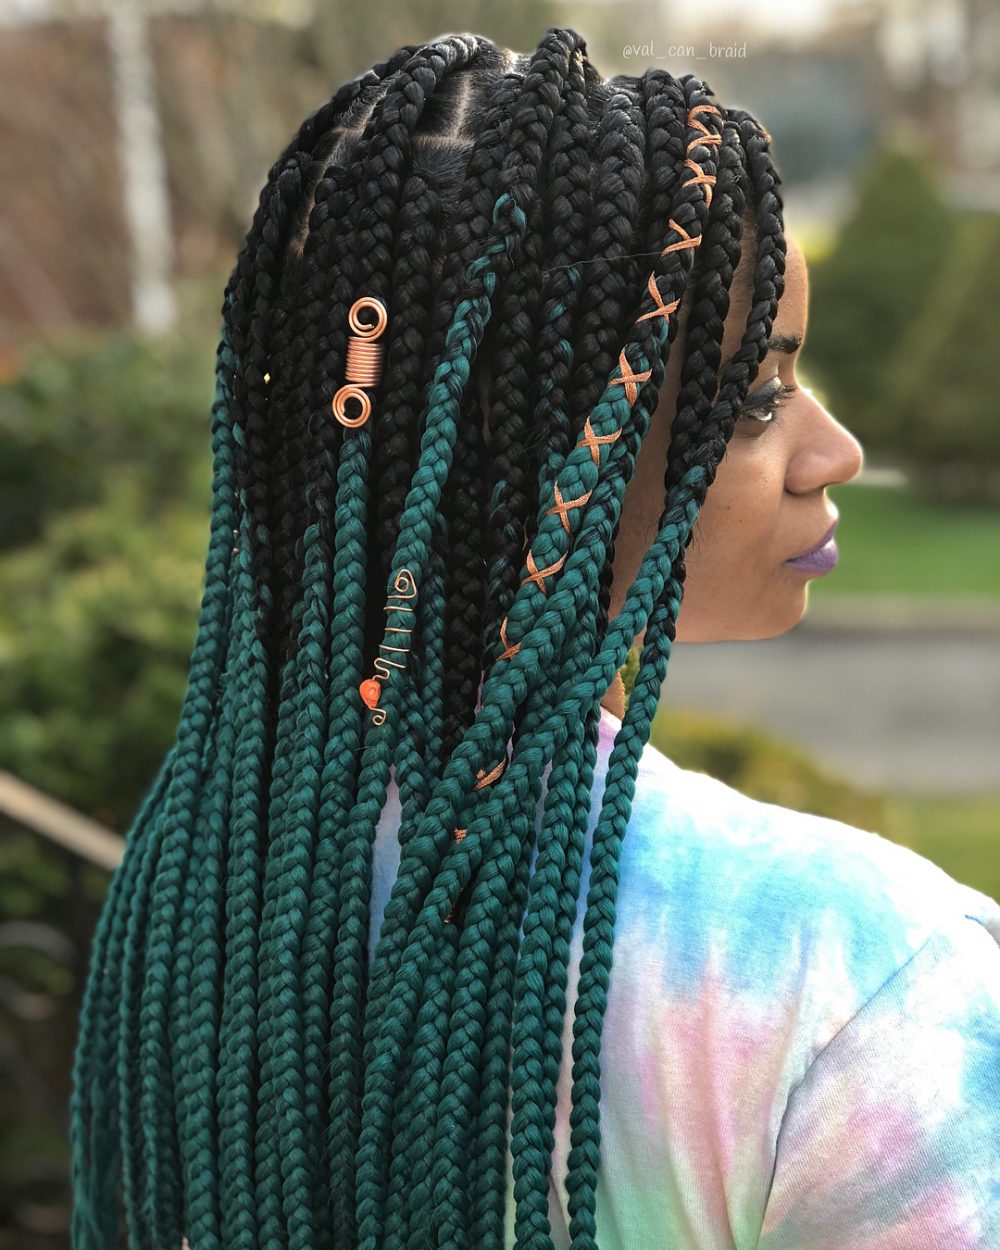 Braided Hair with Strings and Accessories